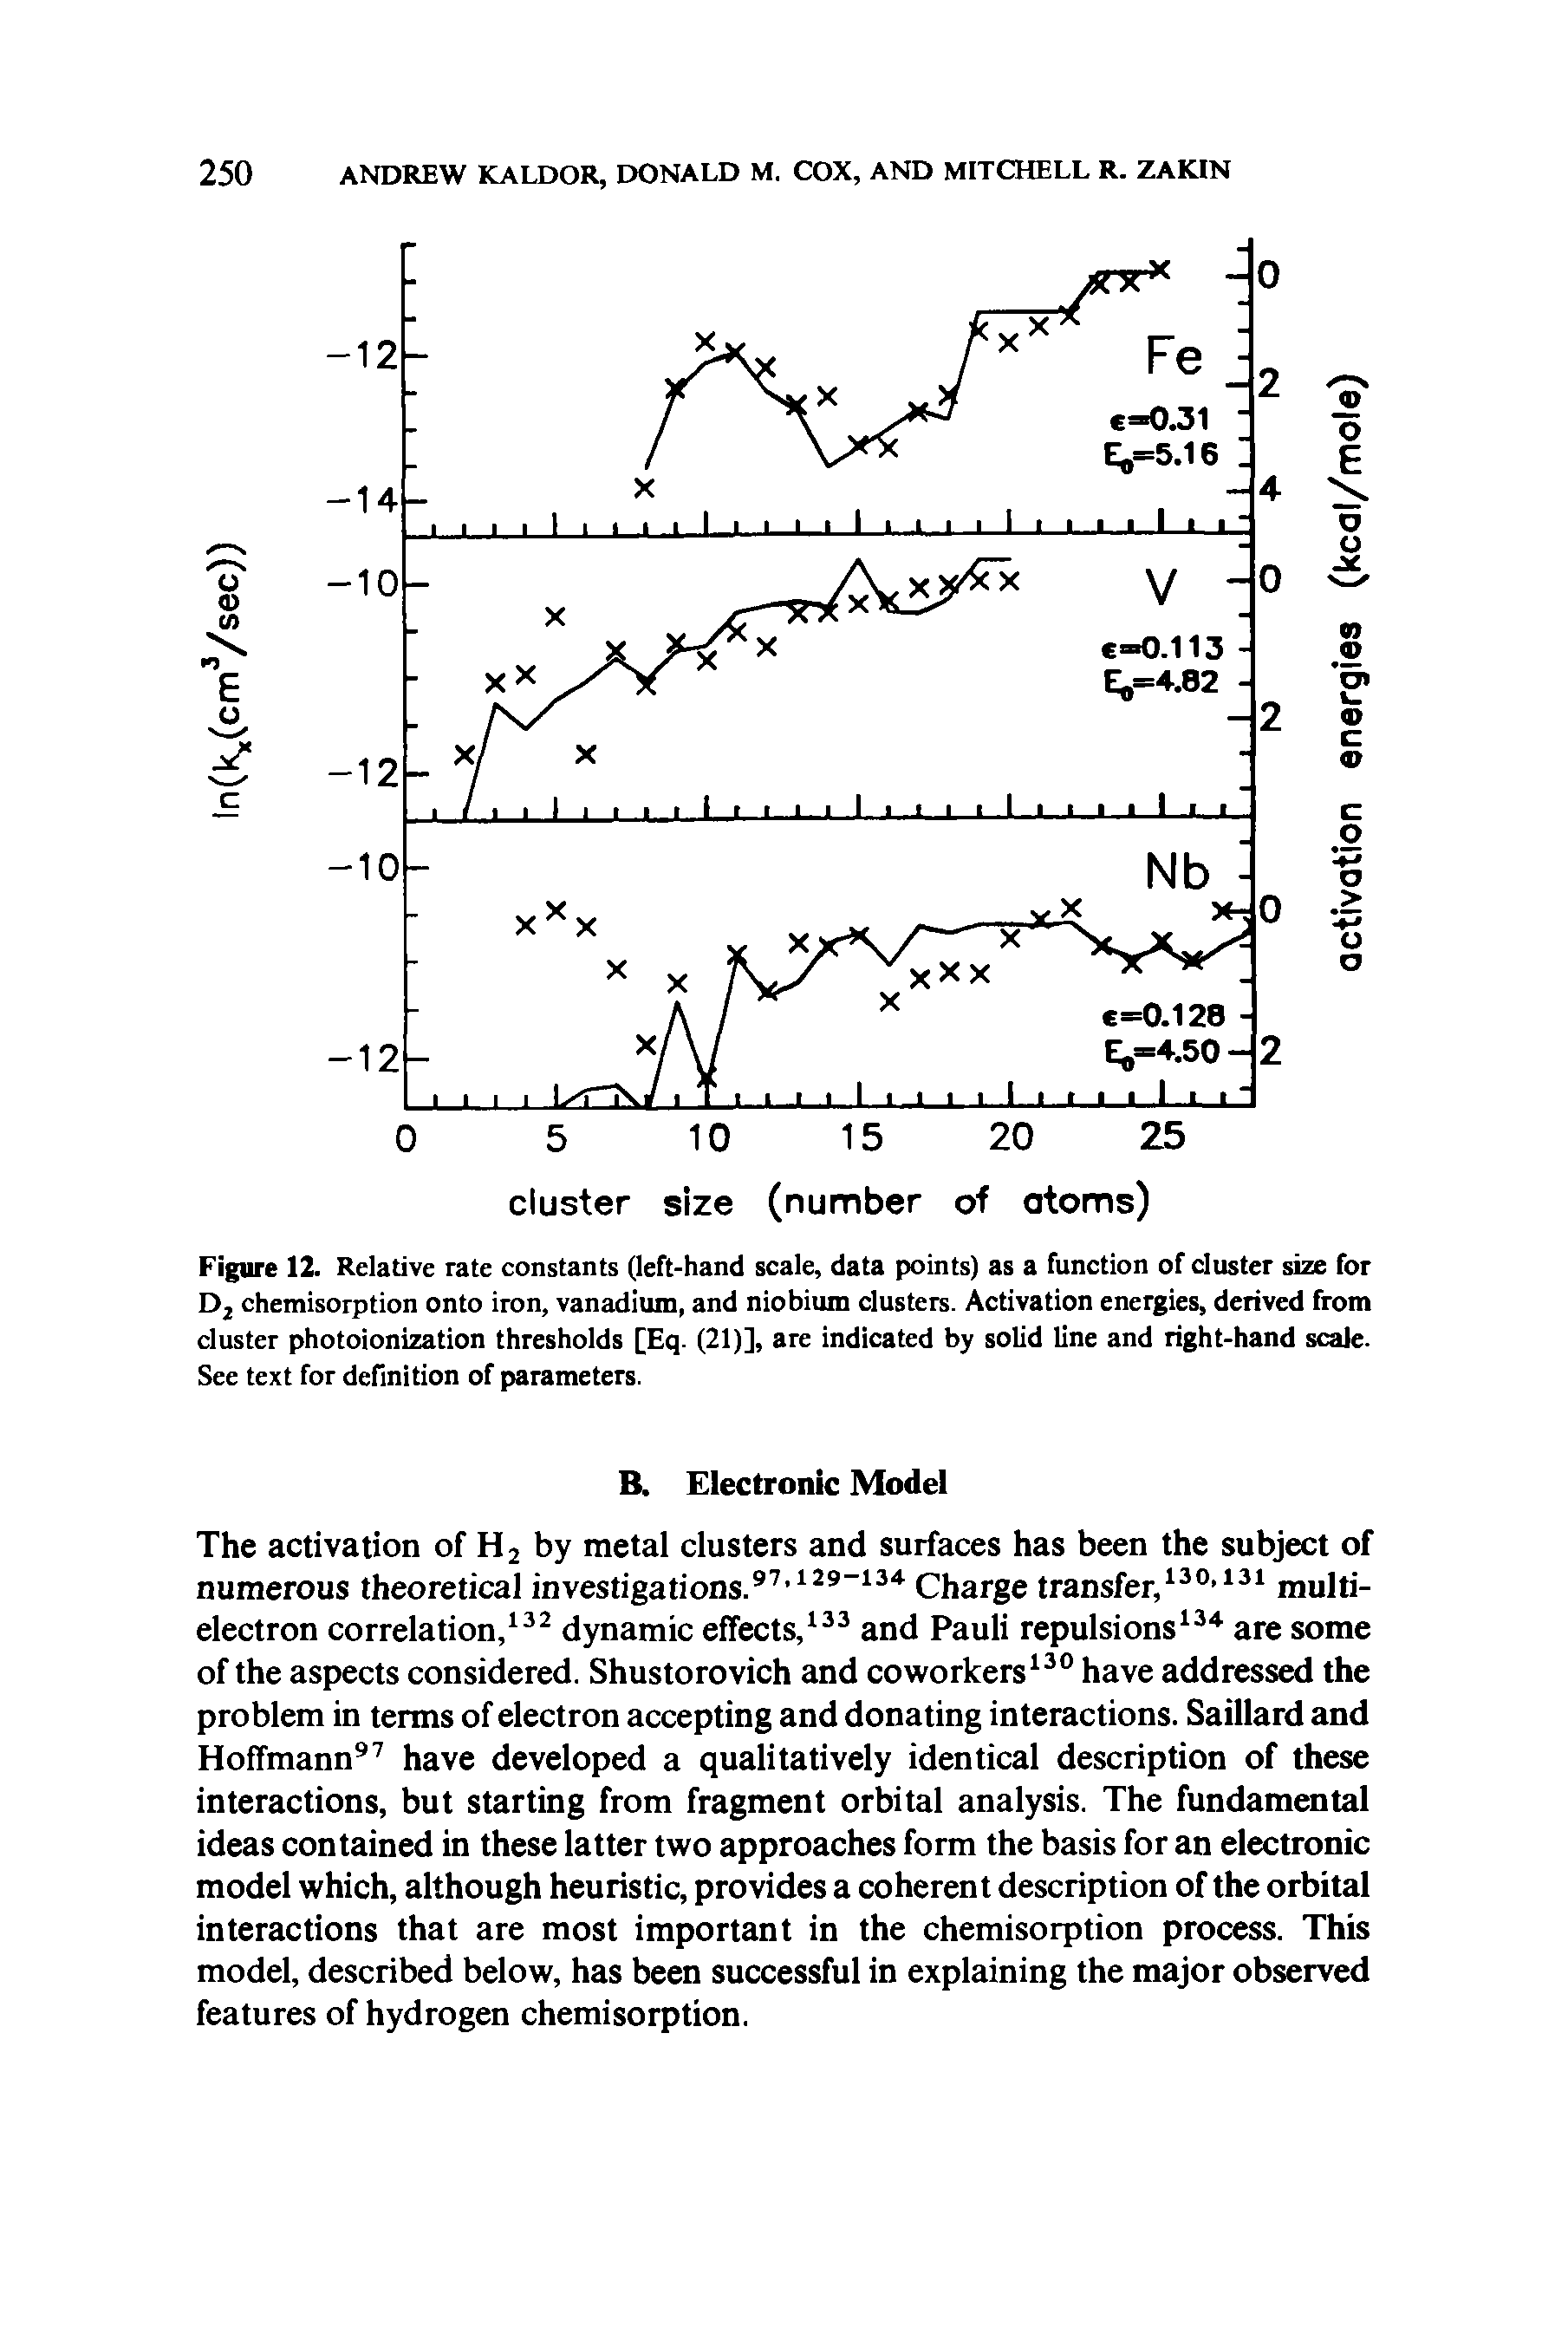 Figure 12. Relative rate constants (left-hand scale, data points) as a function of cluster size for Dj chemisorption onto iron, vanadium, and niobium clusters. Activation energies, derived from cluster photoionization thresholds [Eq. (21)], are indicated by solid line and right-hand scale. See text for definition of parameters.